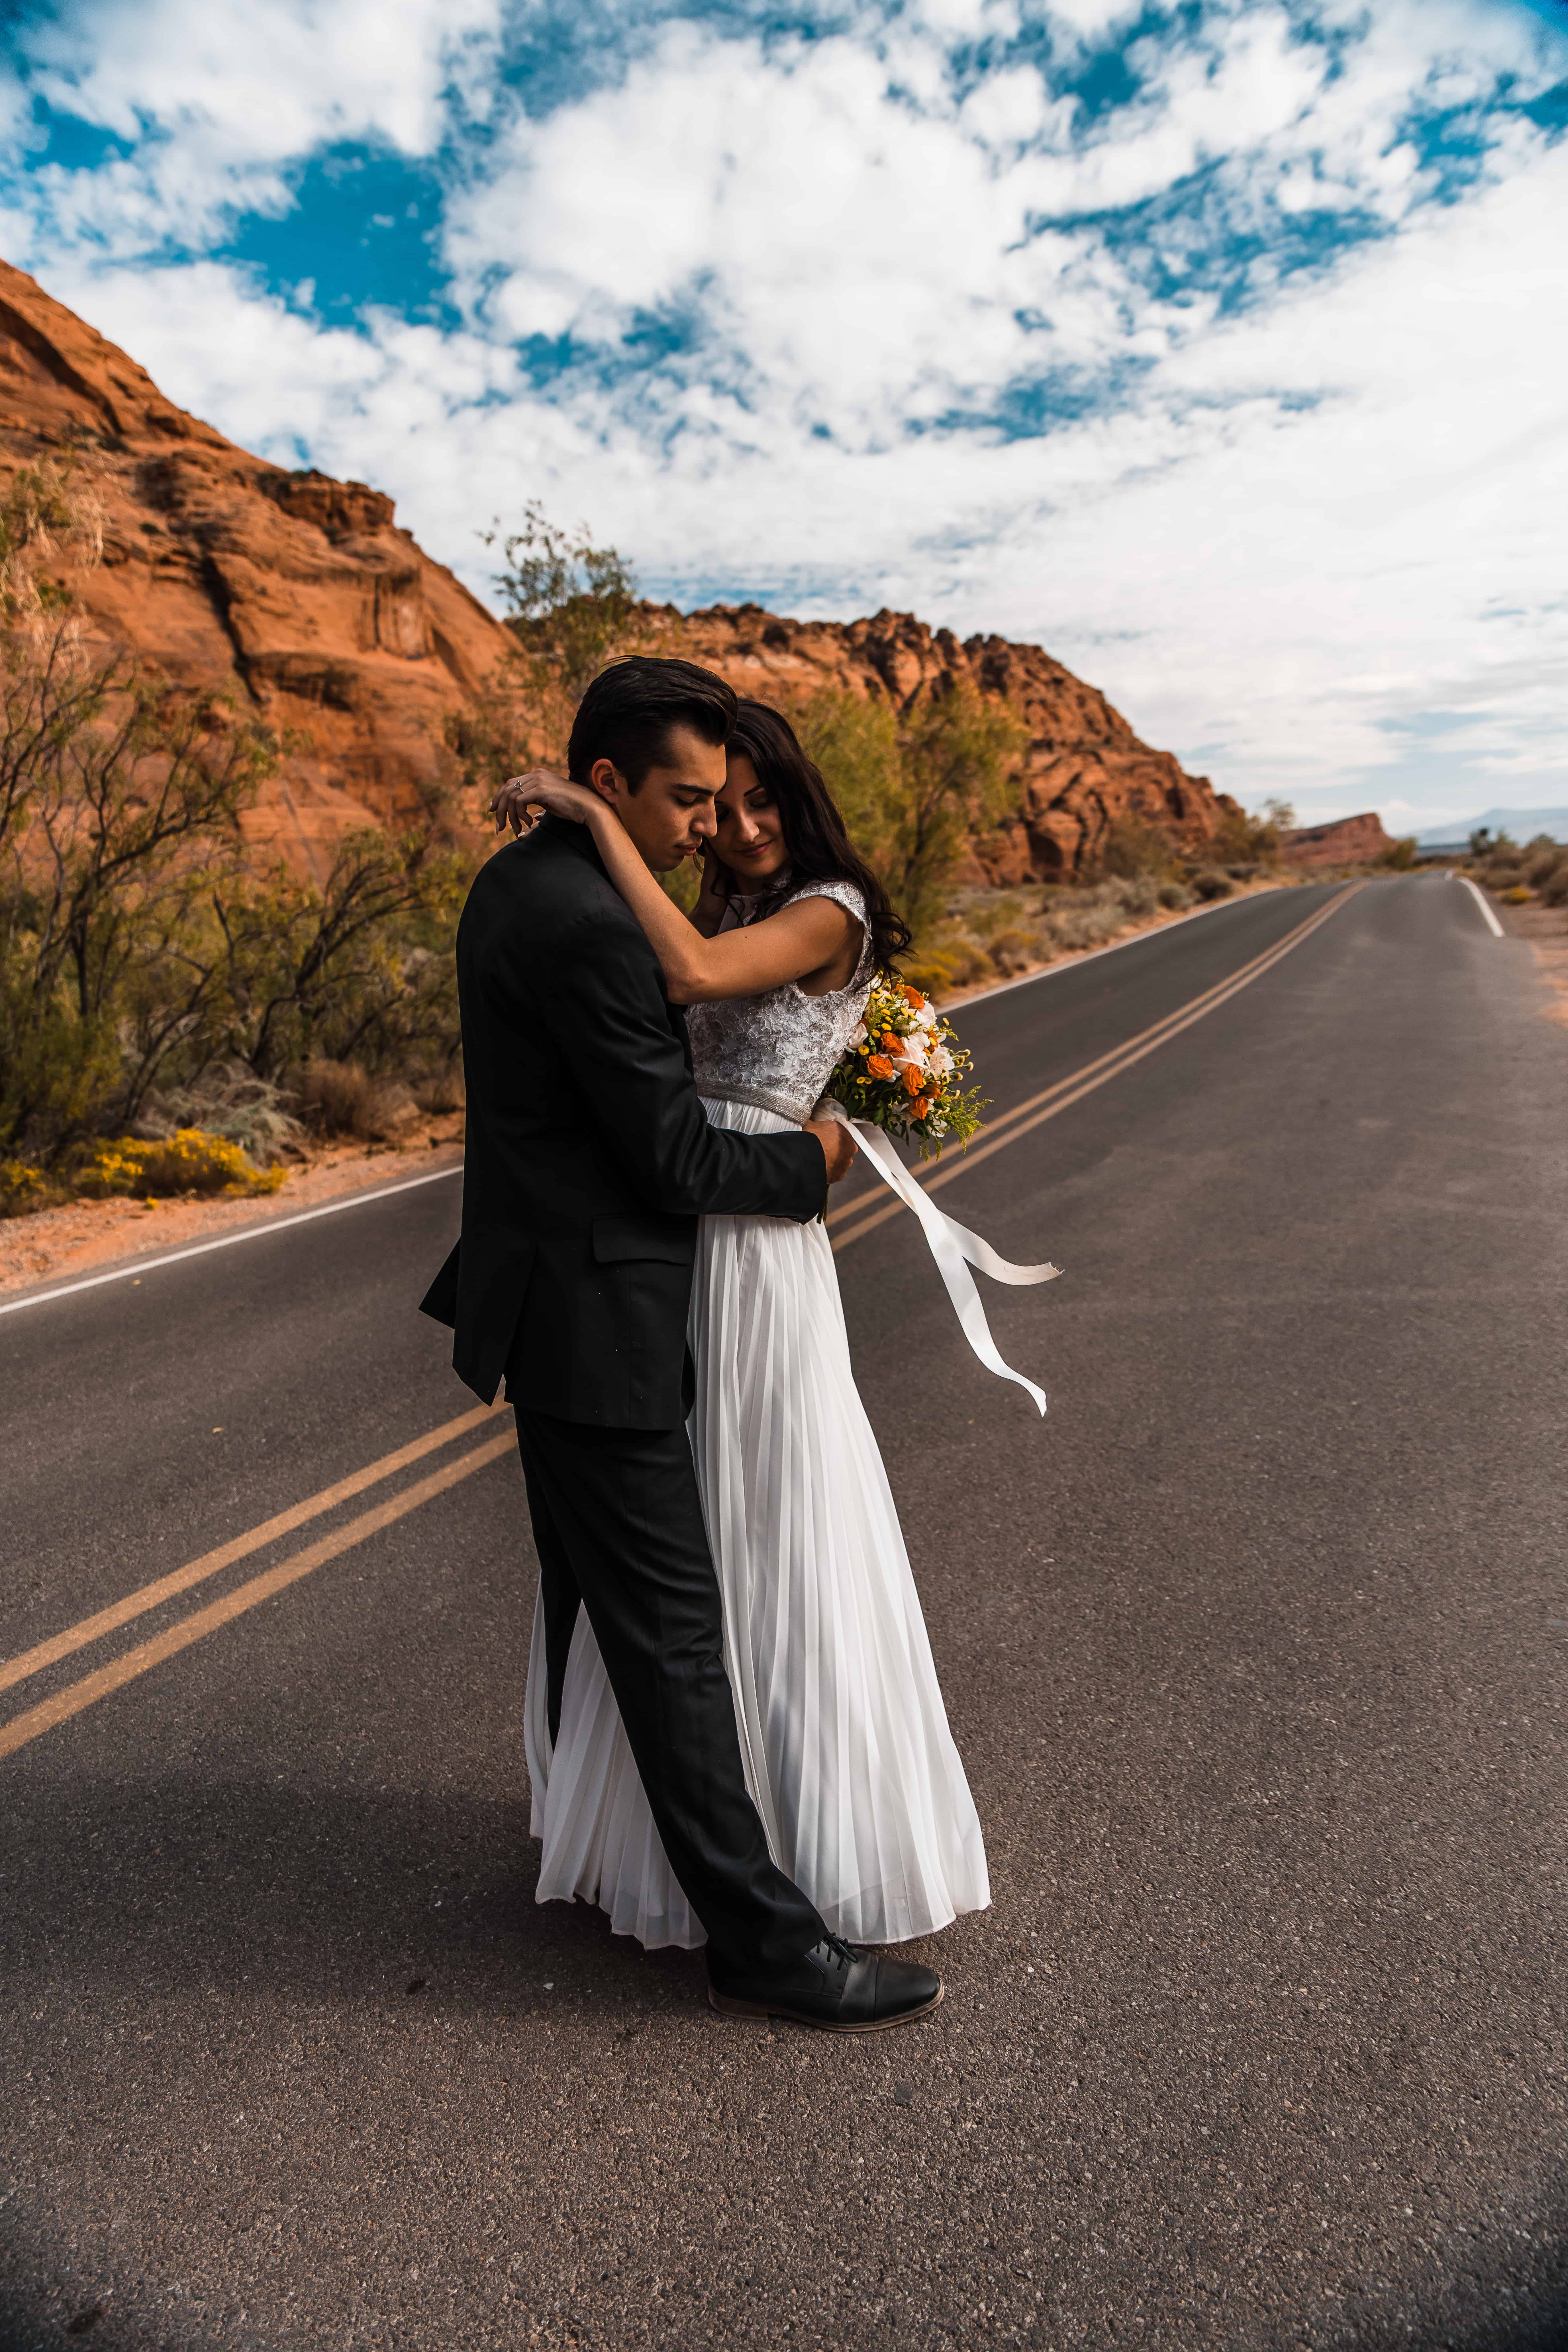 A couple wearing wedding attire embraces after their first look in the road